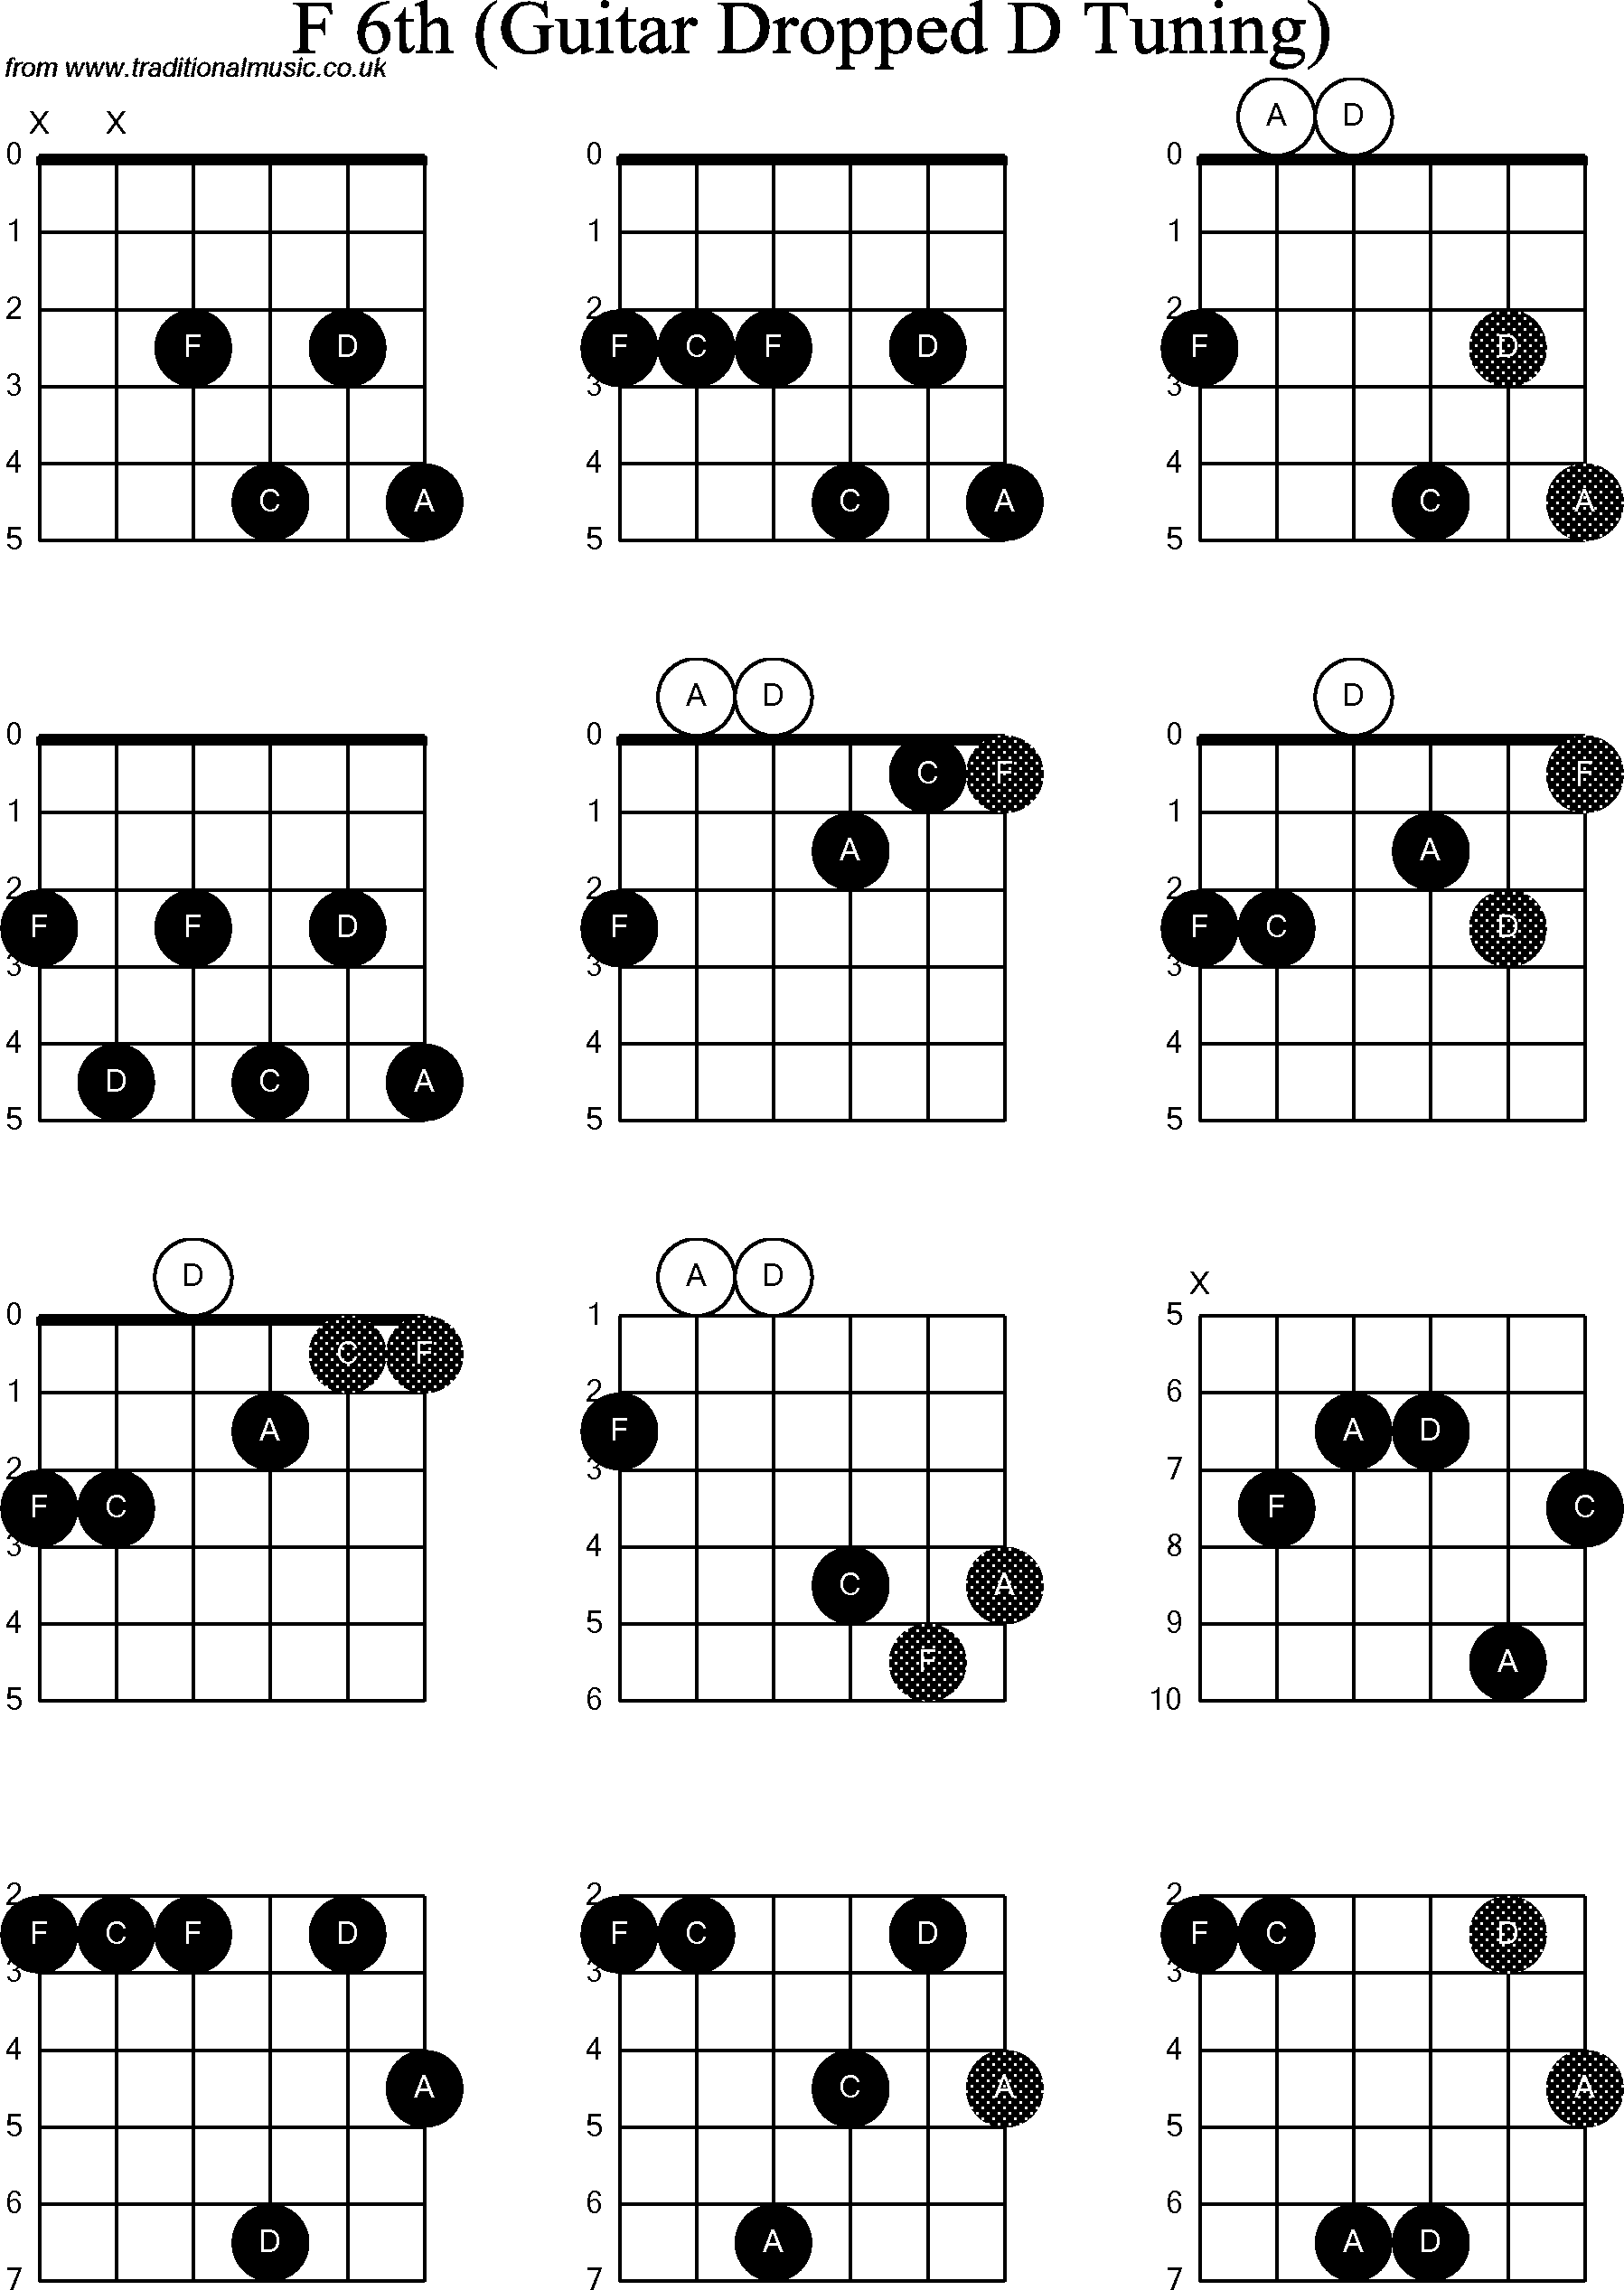 Chord diagrams for dropped D Guitar(DADGBE), F6th